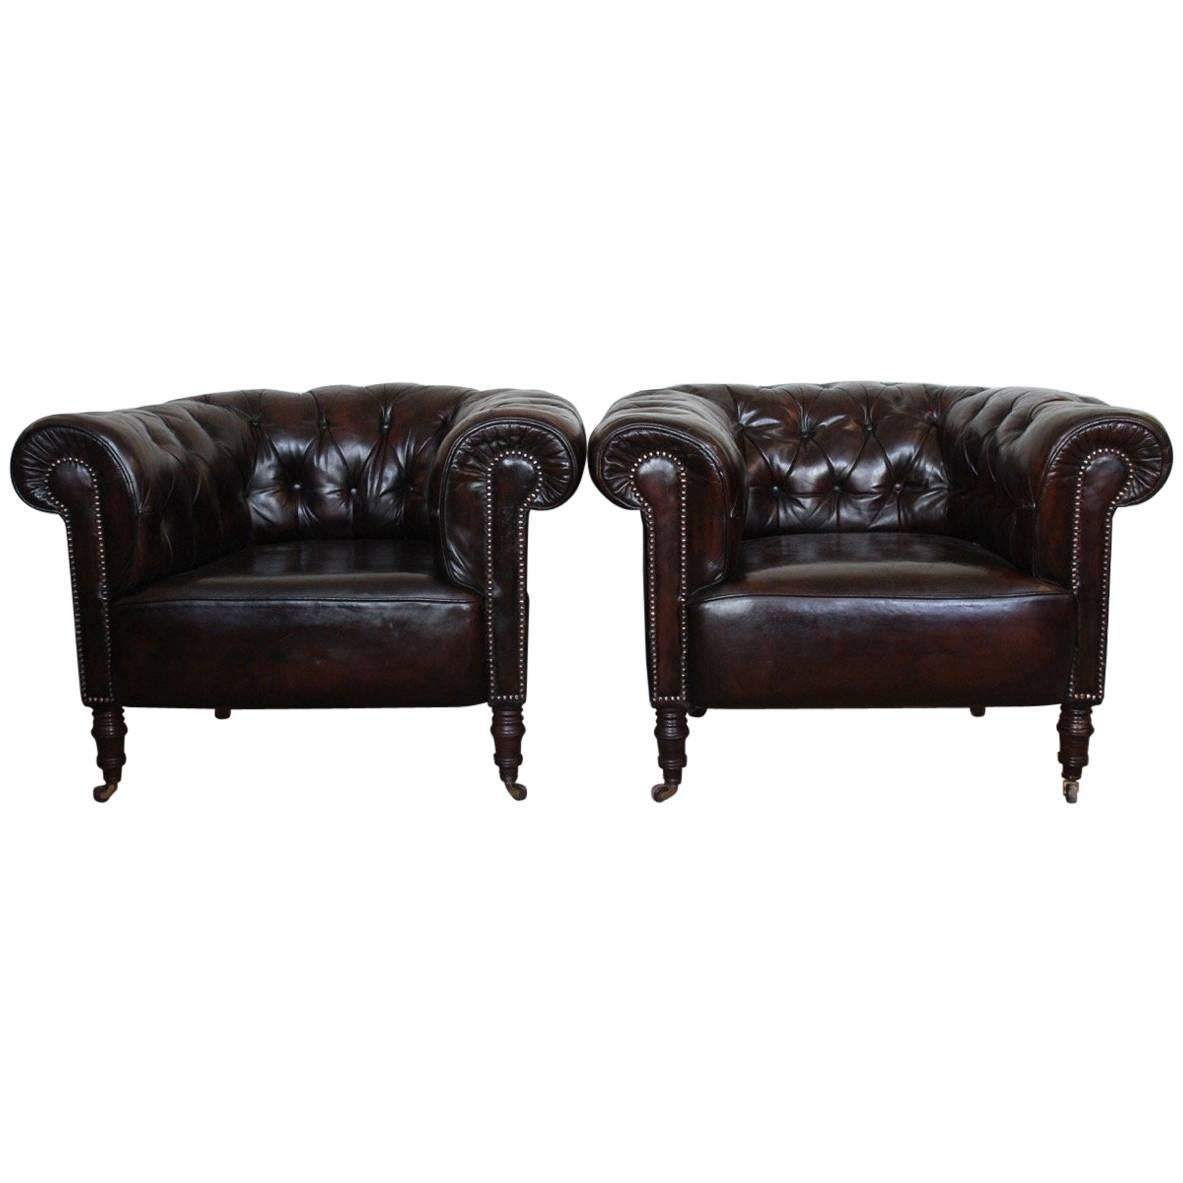 Good Pair of 1900s Chesterfield Type Club Chairs